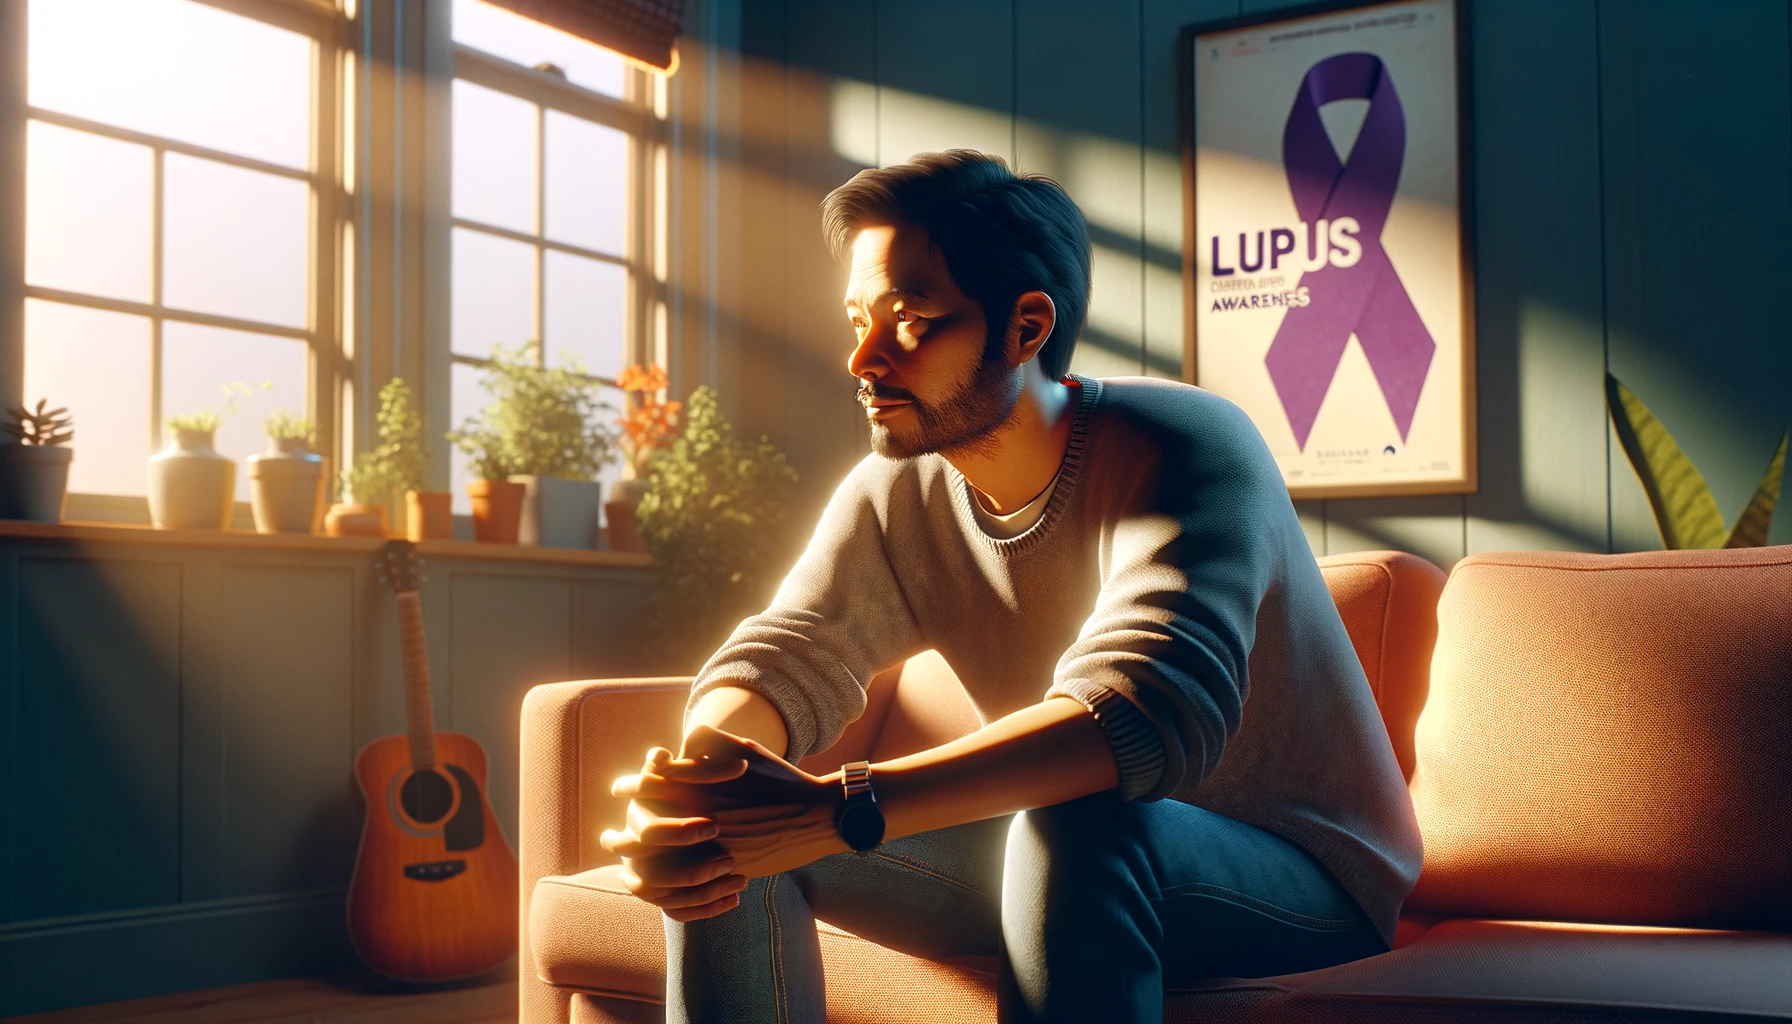 Featured image for “Can Men Get Lupus?”